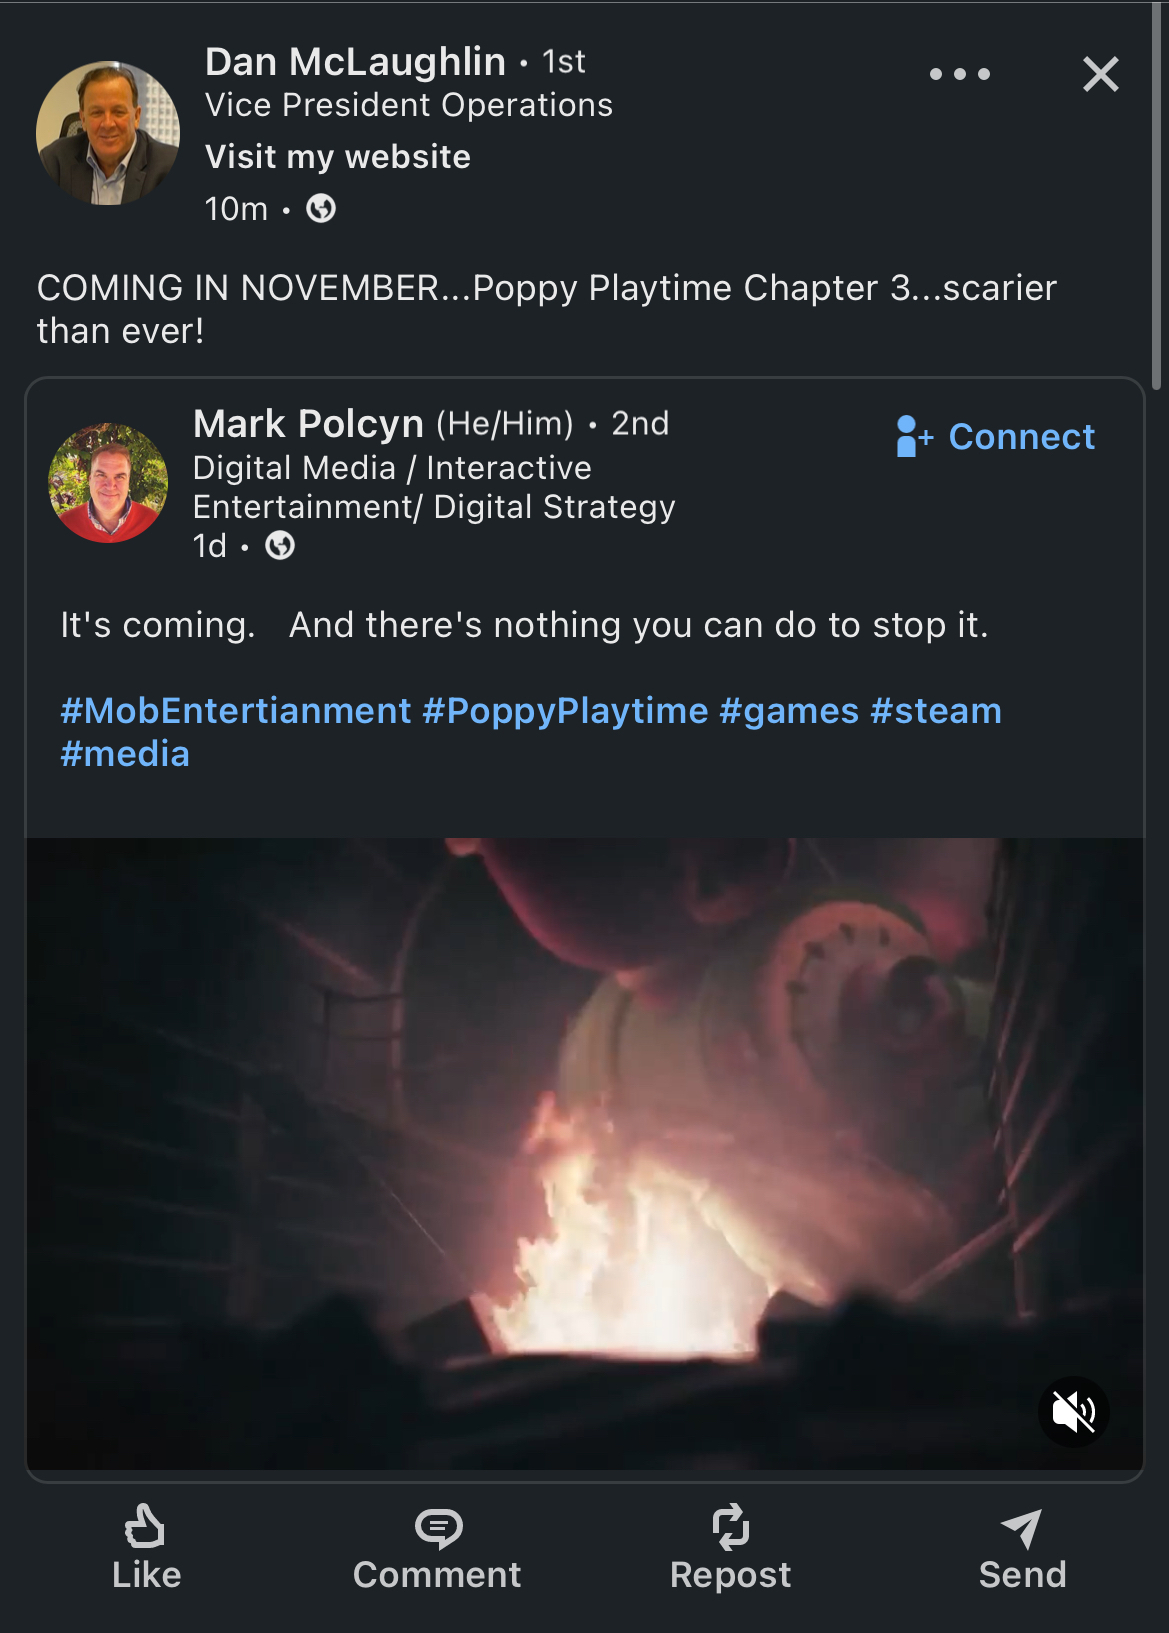 Poppy Playtime: Chapter 3 coming soon - What's new + Expected release date